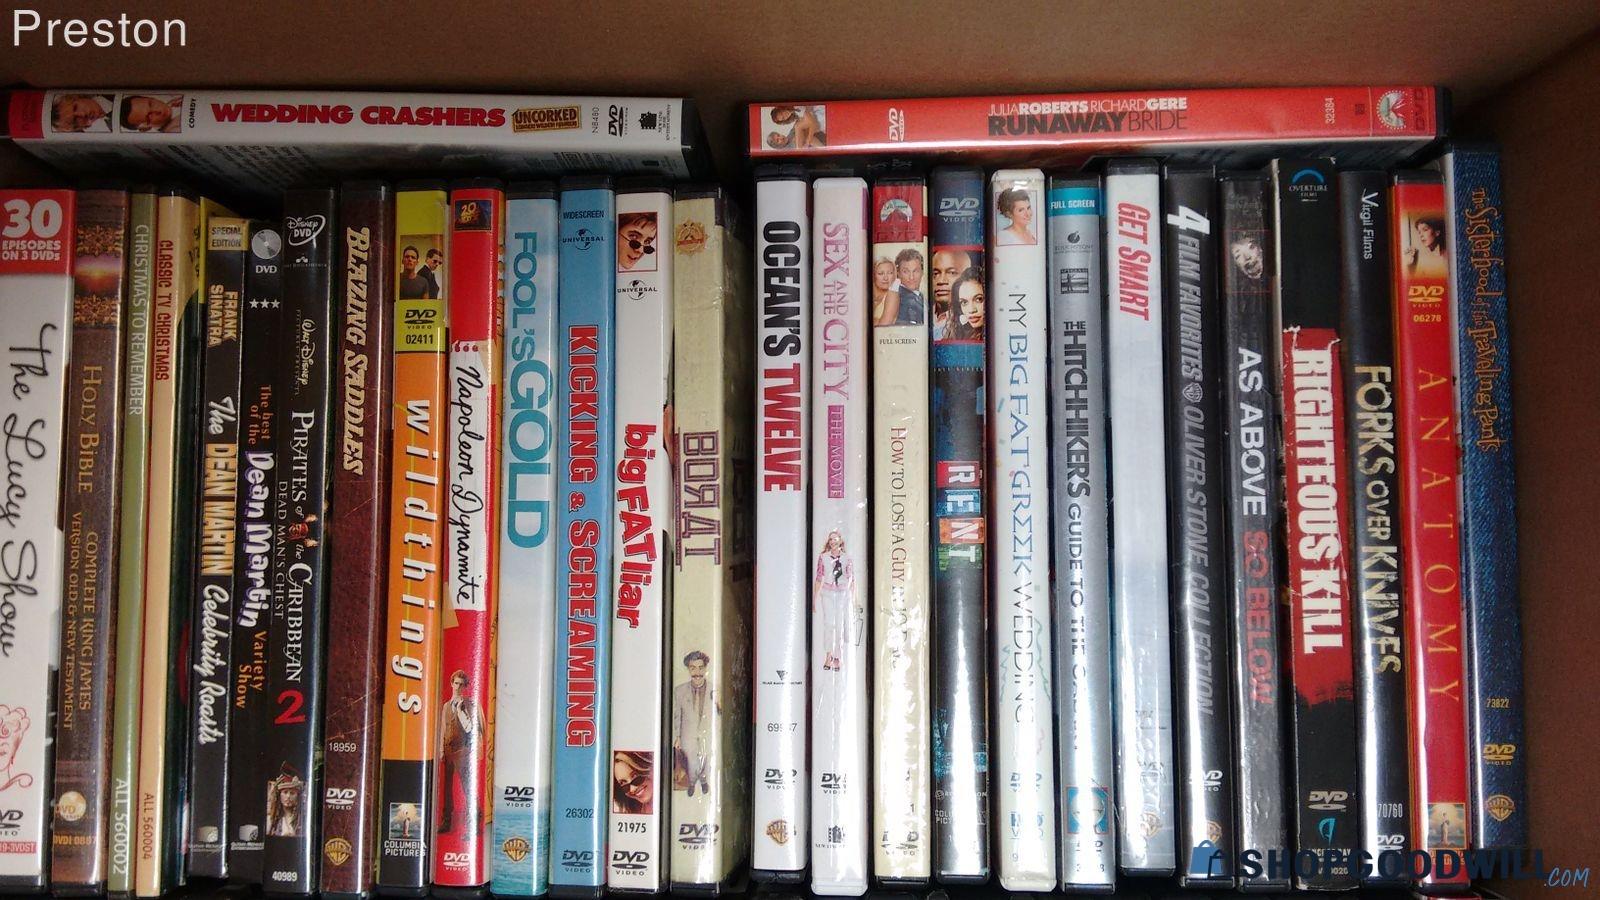 Huge Lot of Mixed Genre DVDs - Over 15 Pounds!!! - shopgoodwill.com